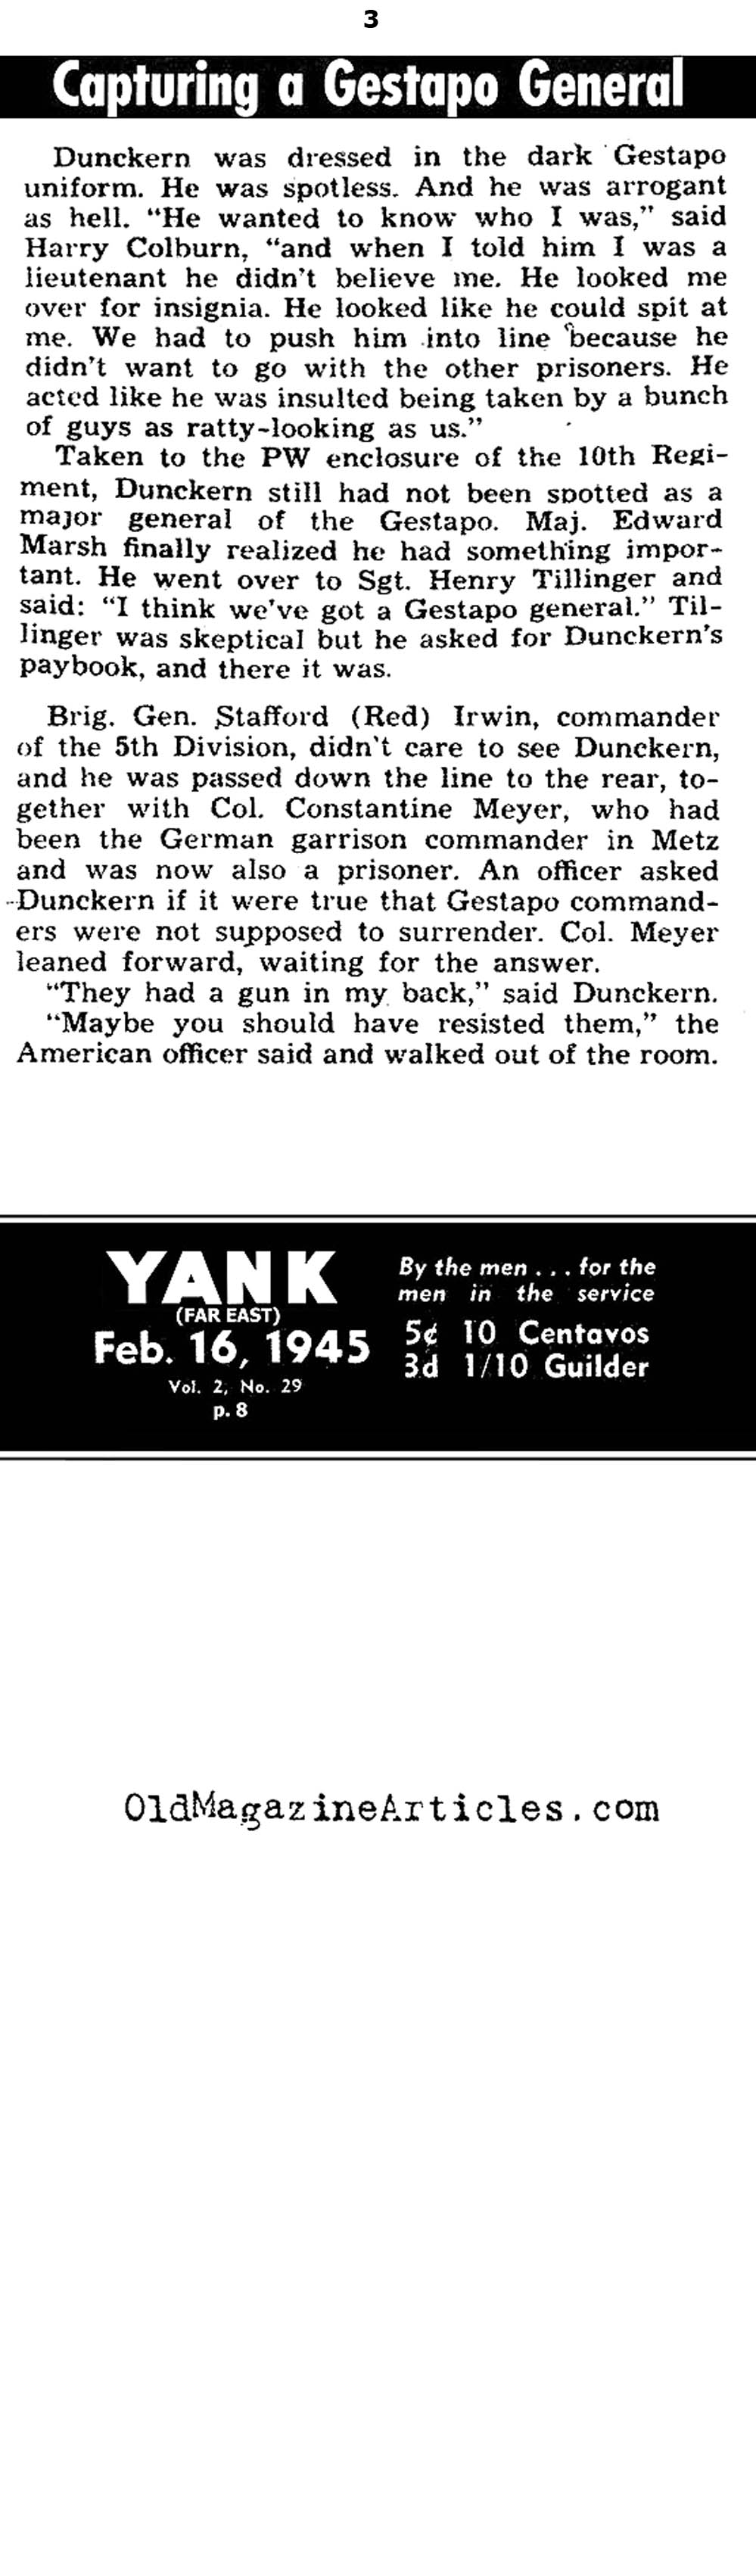  The Surrender of a Gestapo General (Yank Magazine, 1945)